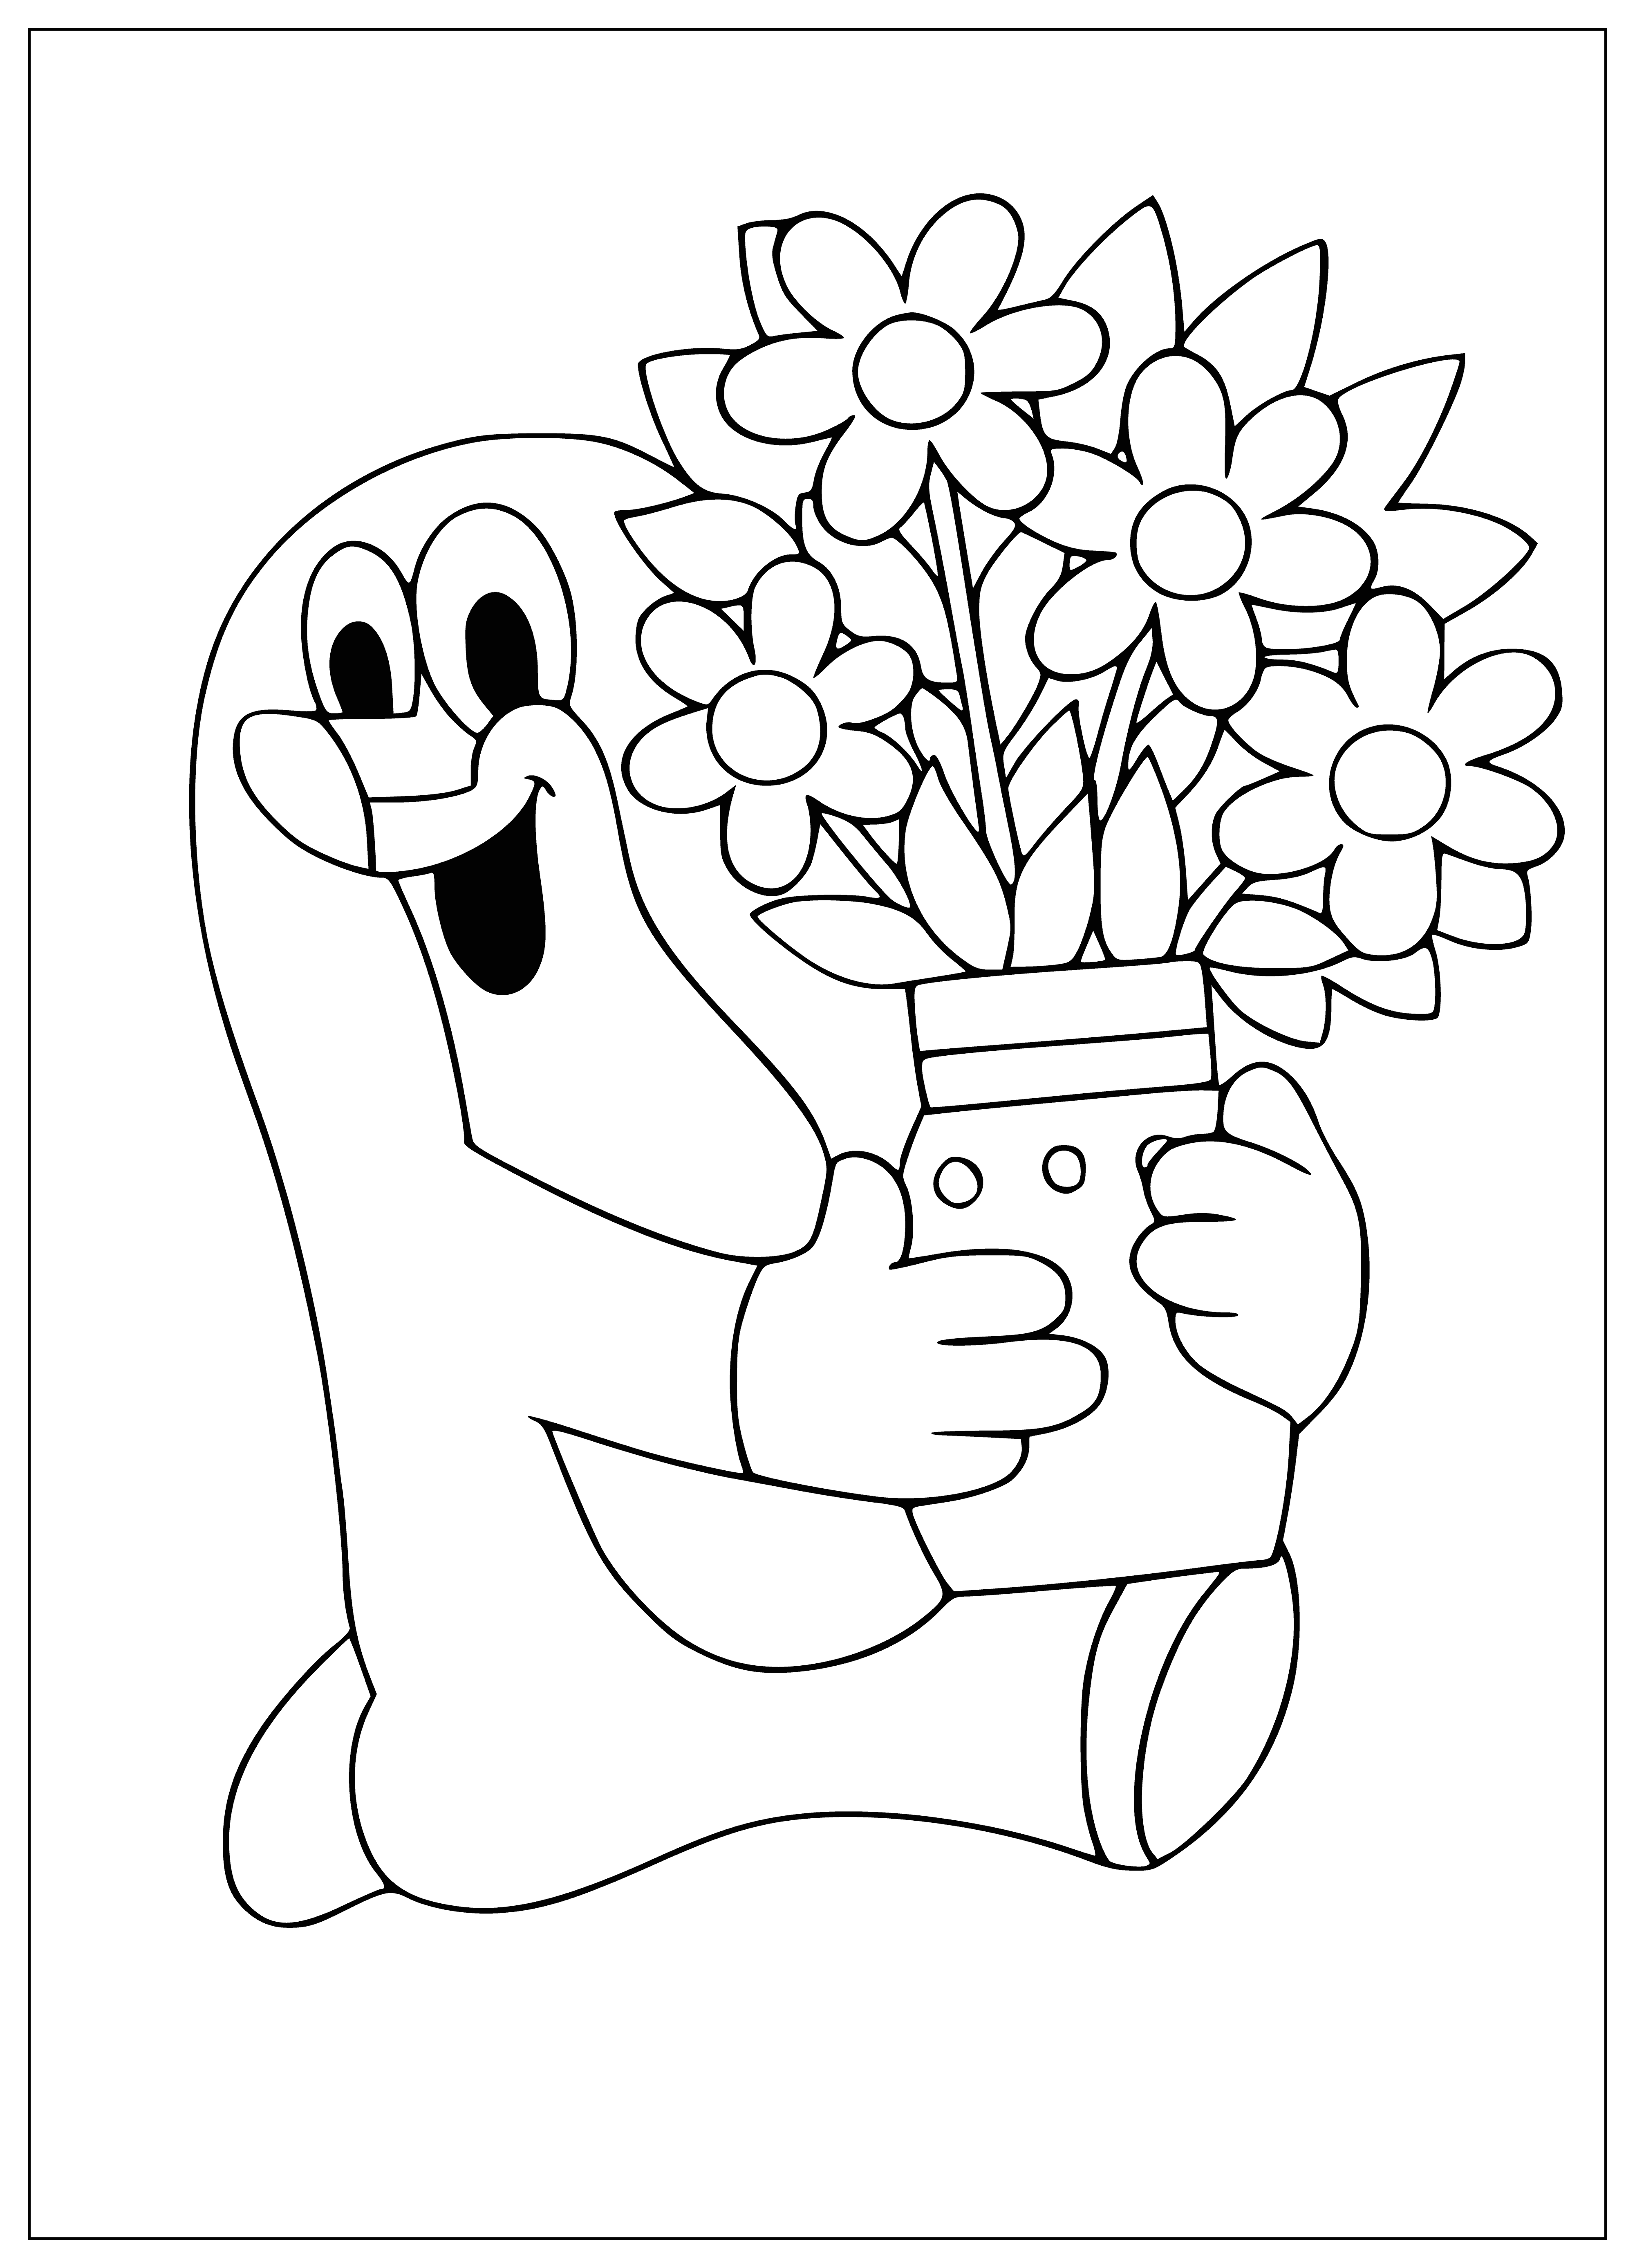 Mole with a vase coloring page